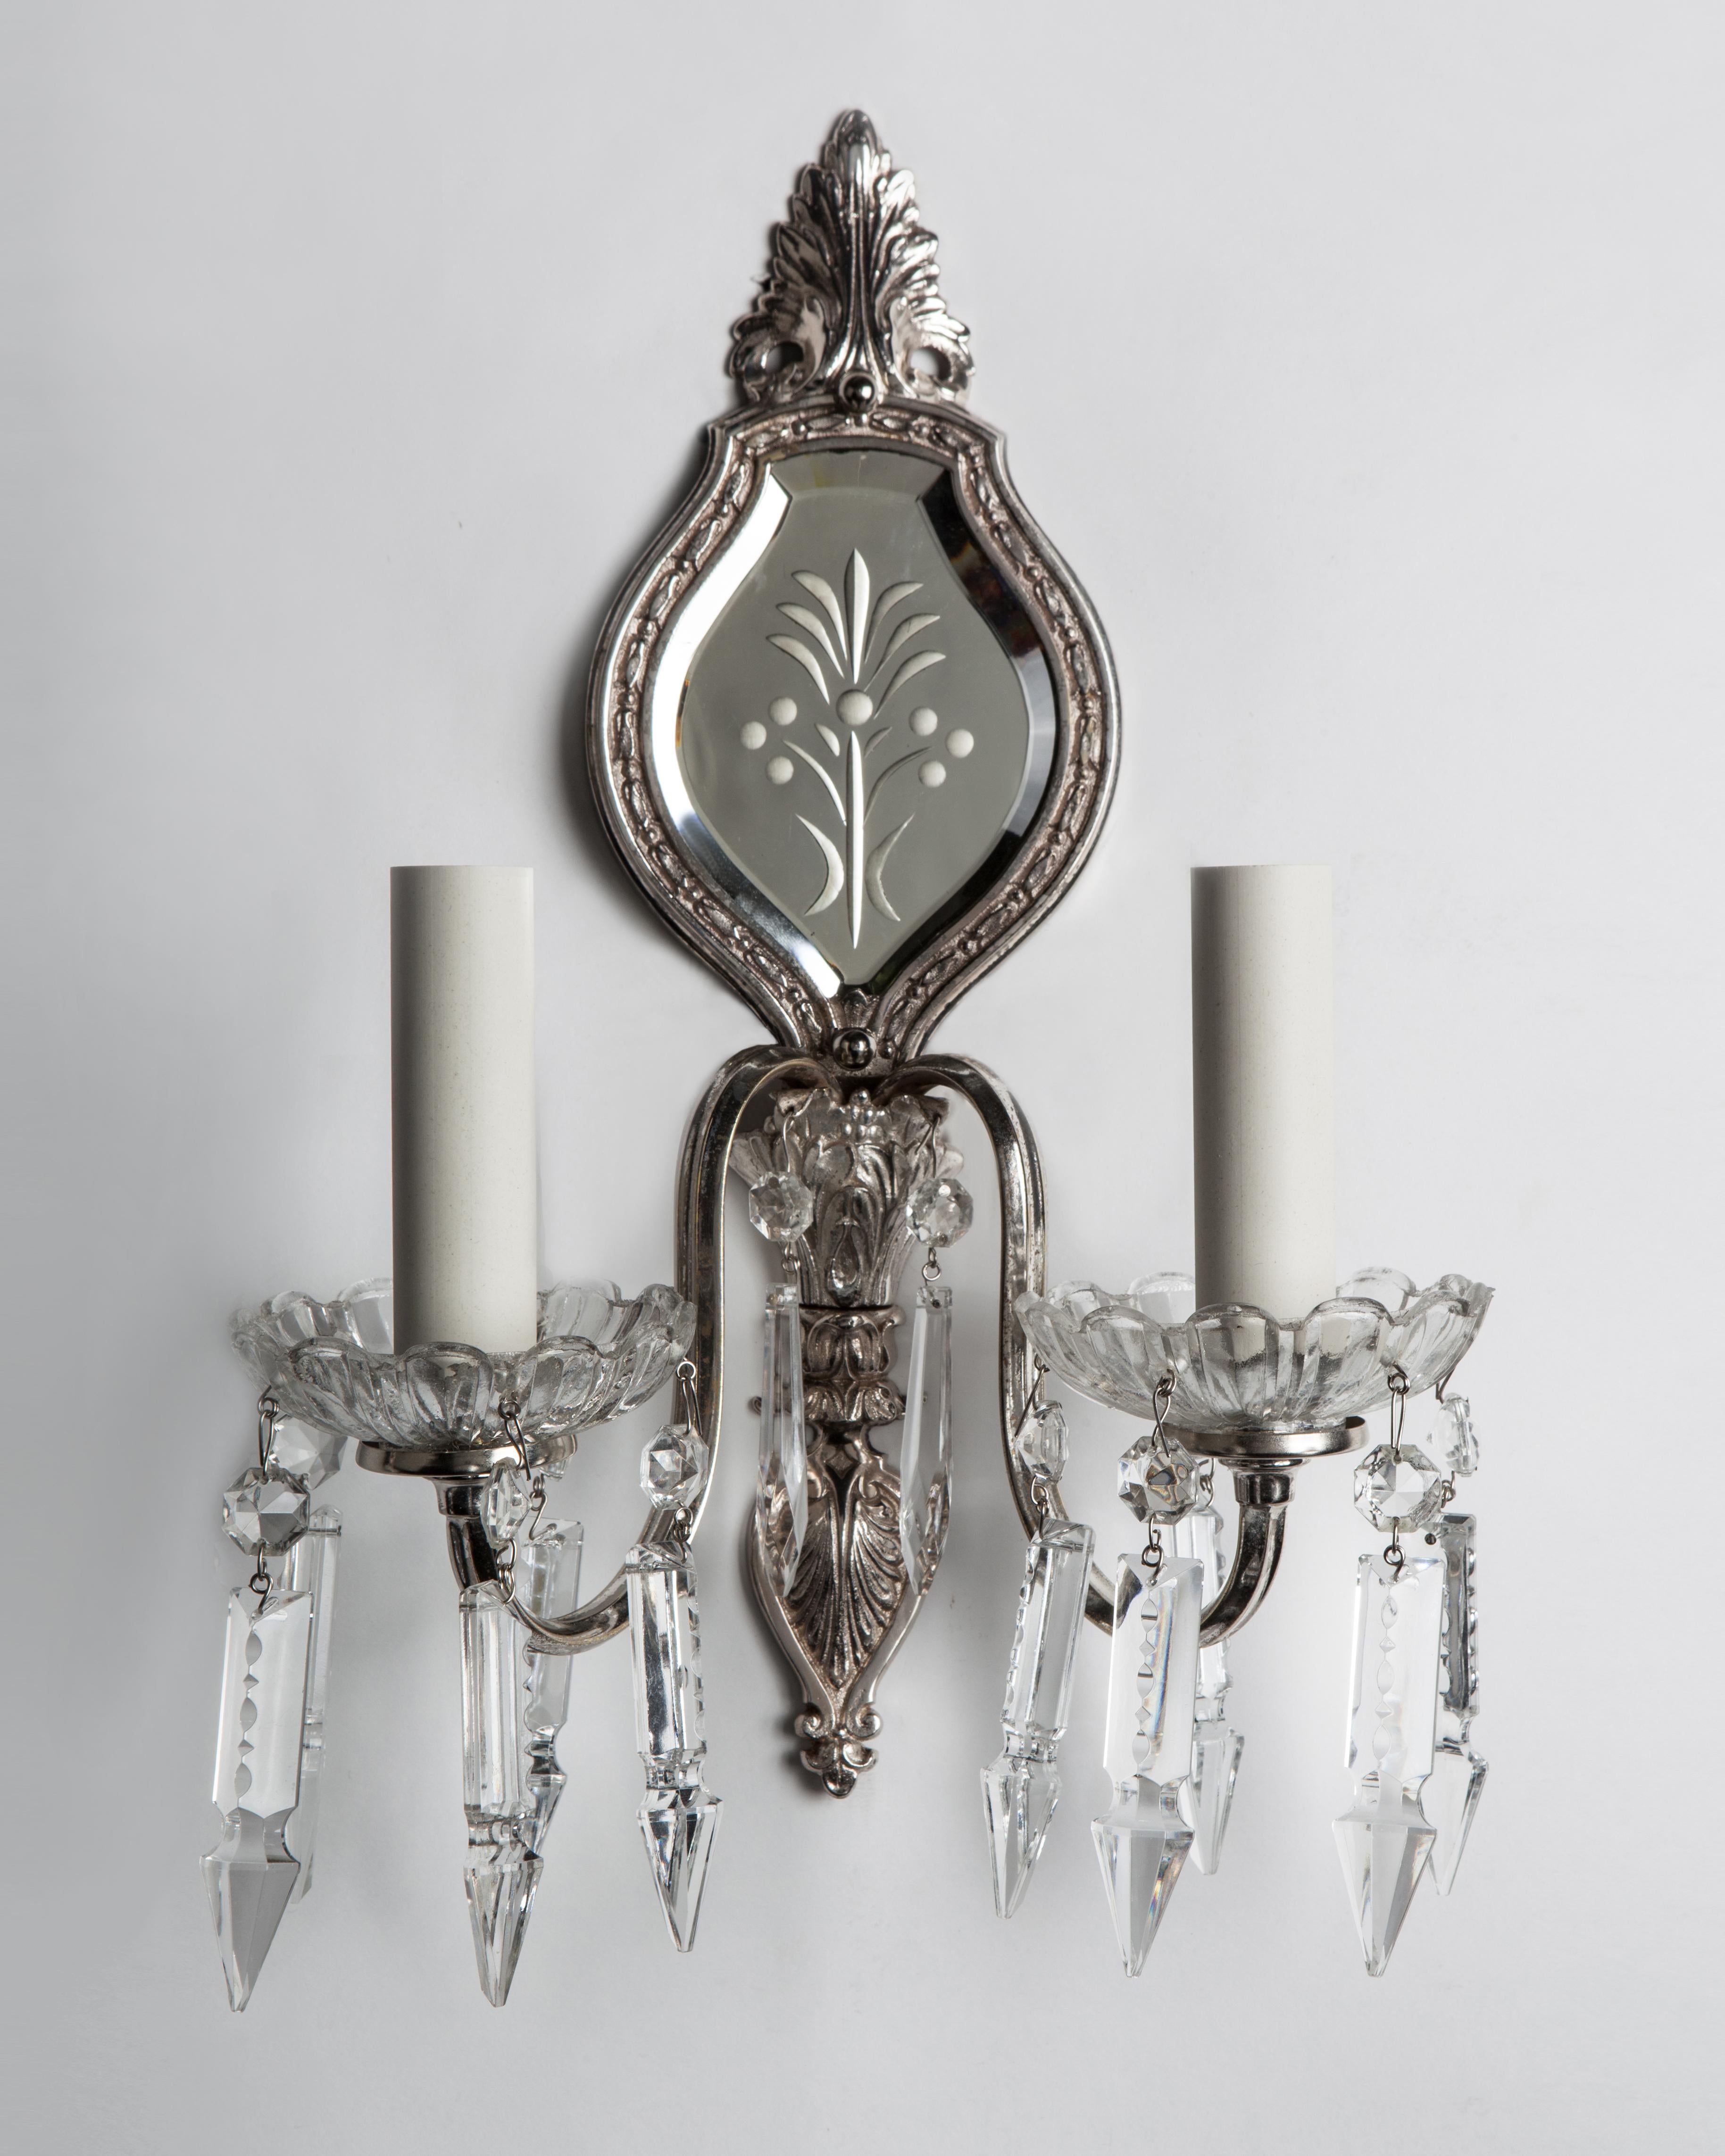 AIS2929
A pair of two arm sconces with wheel-cut mirrored backplates, dressed with crystal bobeches and spear prisms. In their original aged silverplate finish. Due to the antique nature of these fixtures, there may be some nicks or imperfections in